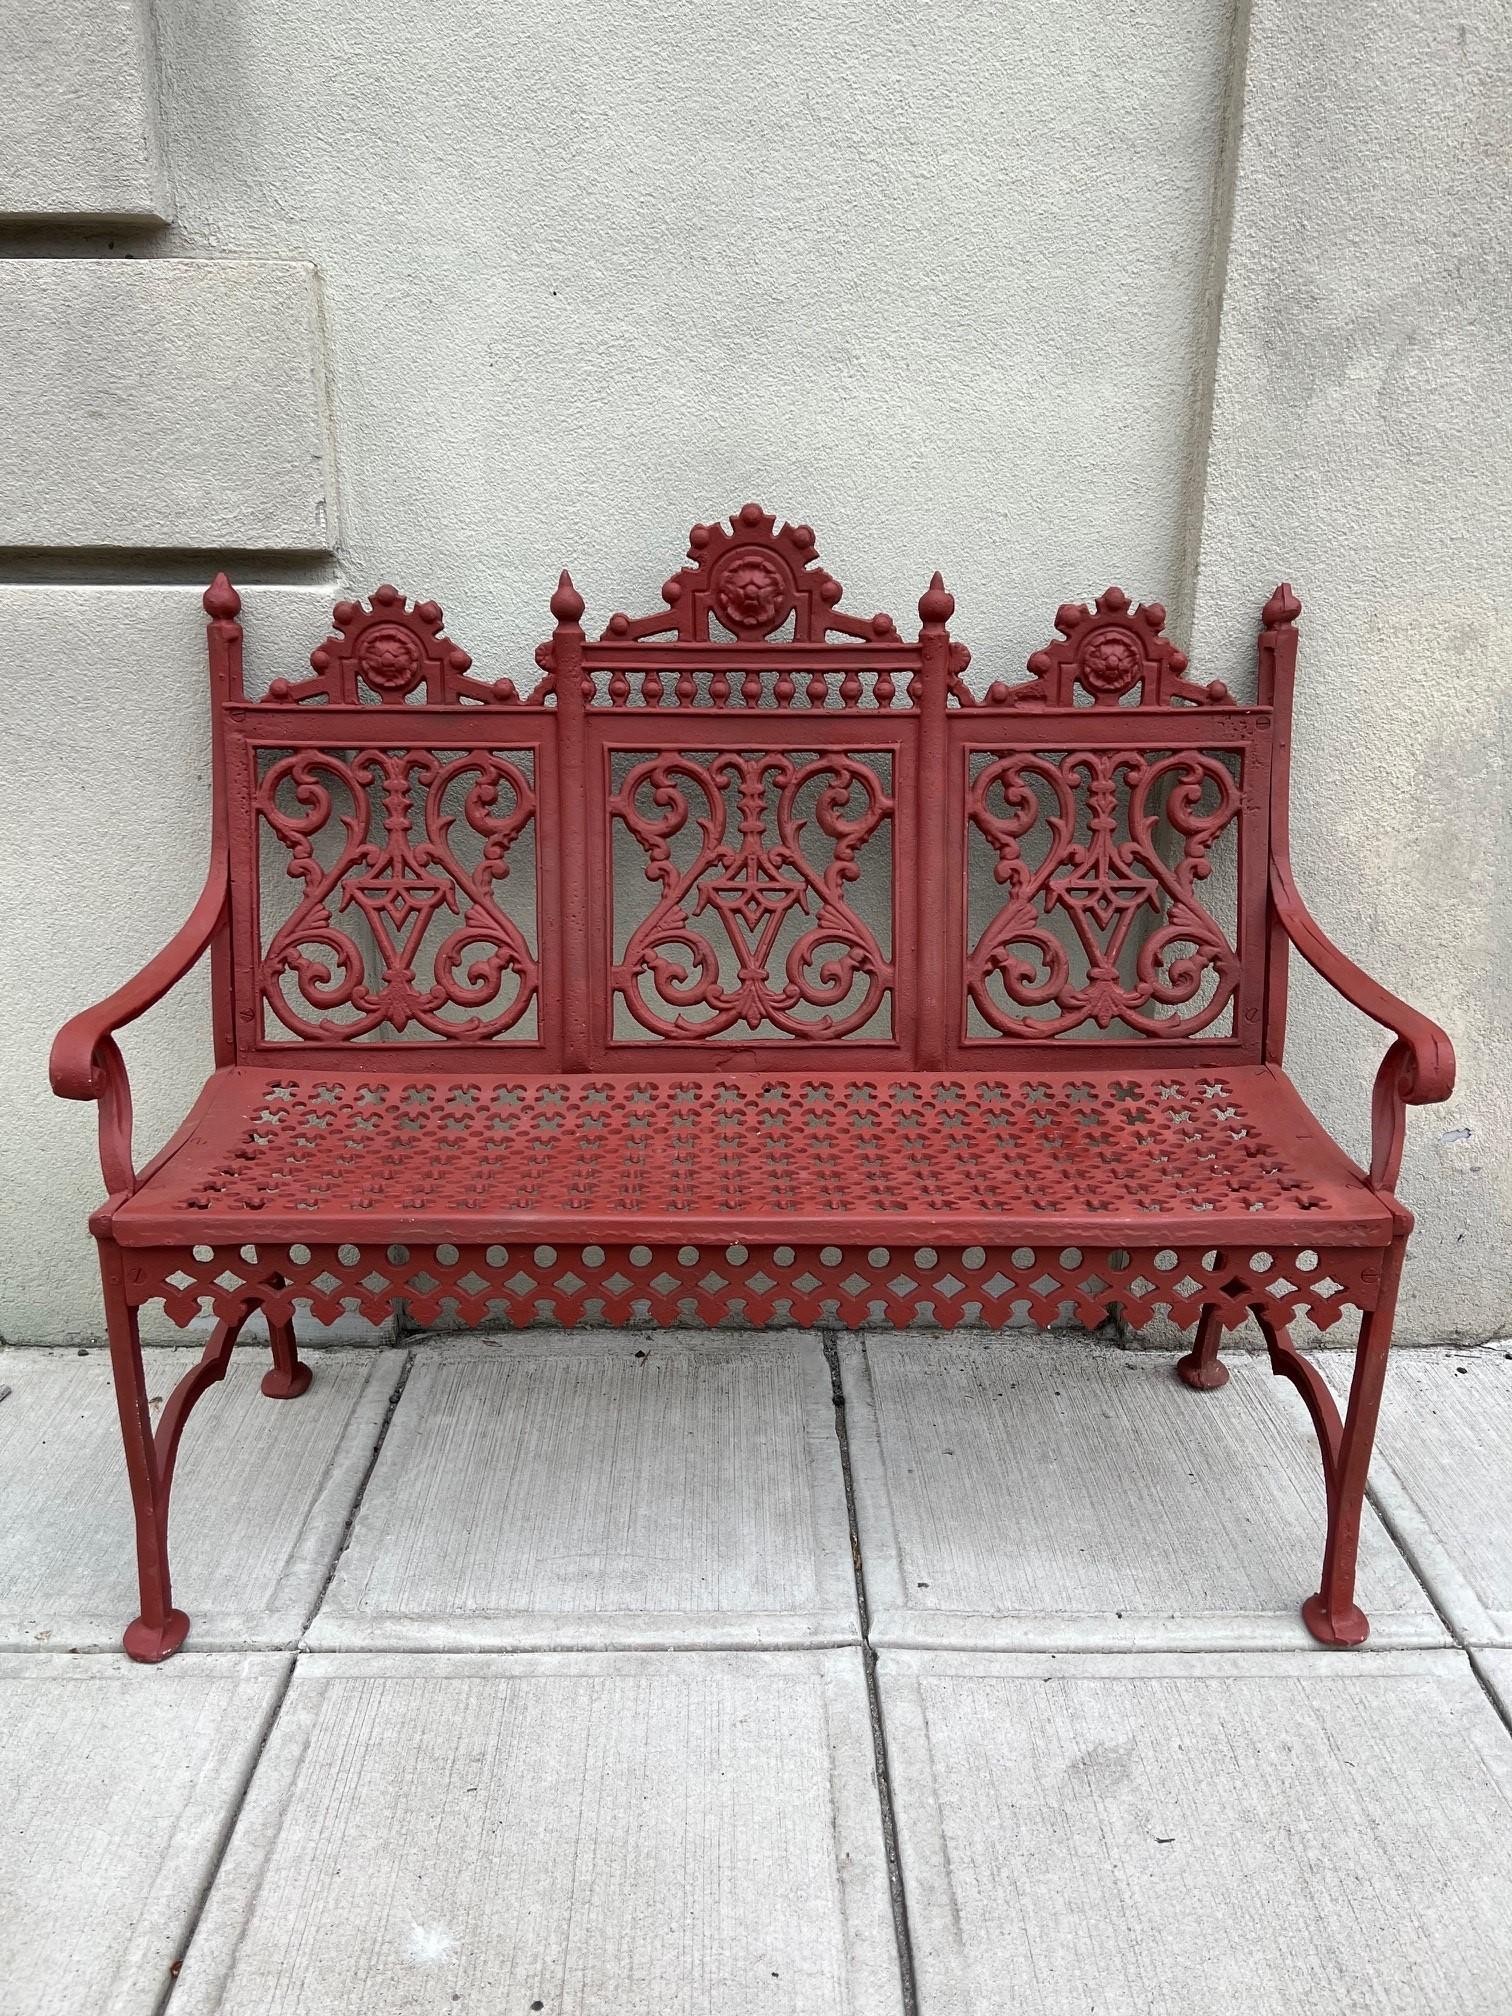 Vintage cast aluminum garden bench in the style of the William Adams Foundry Philadelphia PA. William Adams opened his foundry in 1903 in Northern Philadelphia known for its diminutive Renaissance style garden pieces. The bench is a good example of